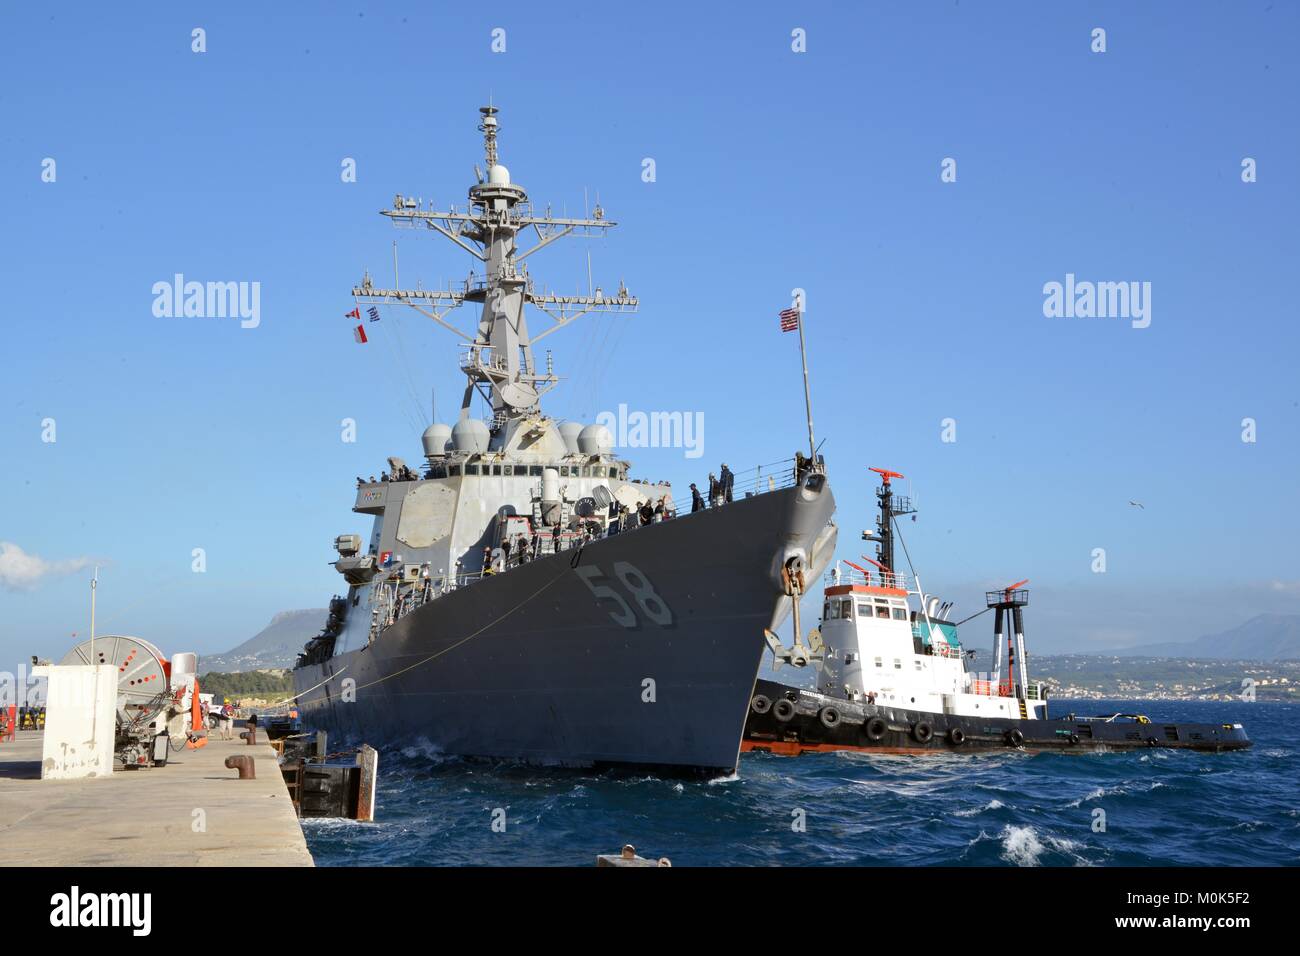 The U.S. Navy Arleigh Burke-class guided-missile destroyer USS Laboon moors at the Marathi NATO Pier Facility April 29, 2015 in Souda Bay, Greece. Stock Photo